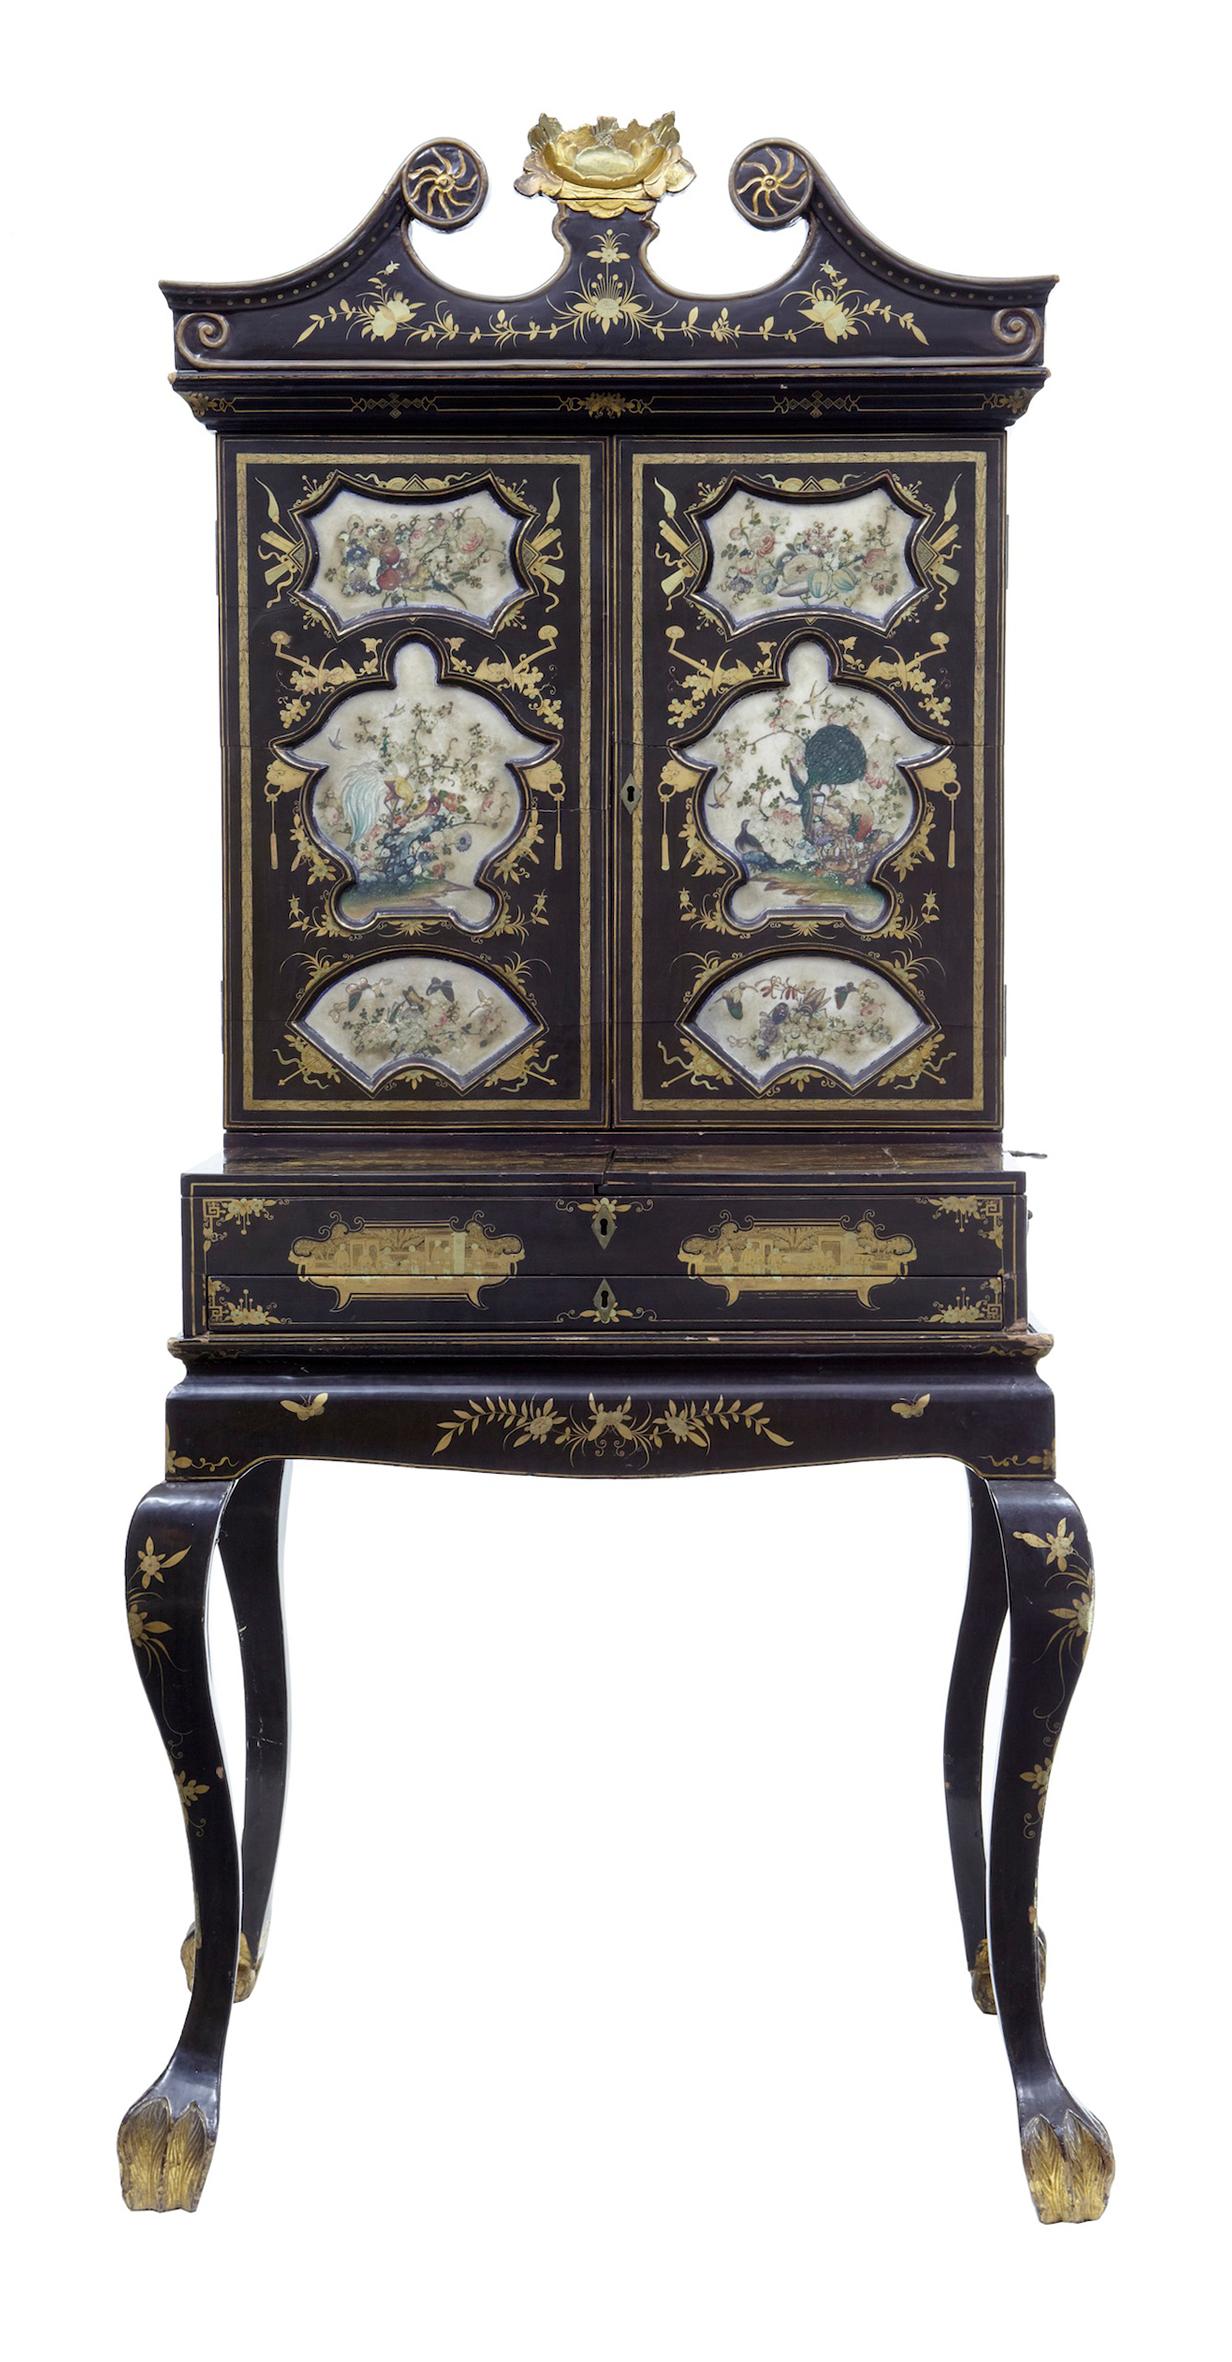 19th century Chinese canton black lacquered desk cabinet, circa 1830.

Stunning quality Chinese export desk, circa 1830. Main feature is the rare alabaster doors which have been hand painted both sides and allows the light to glow through when the